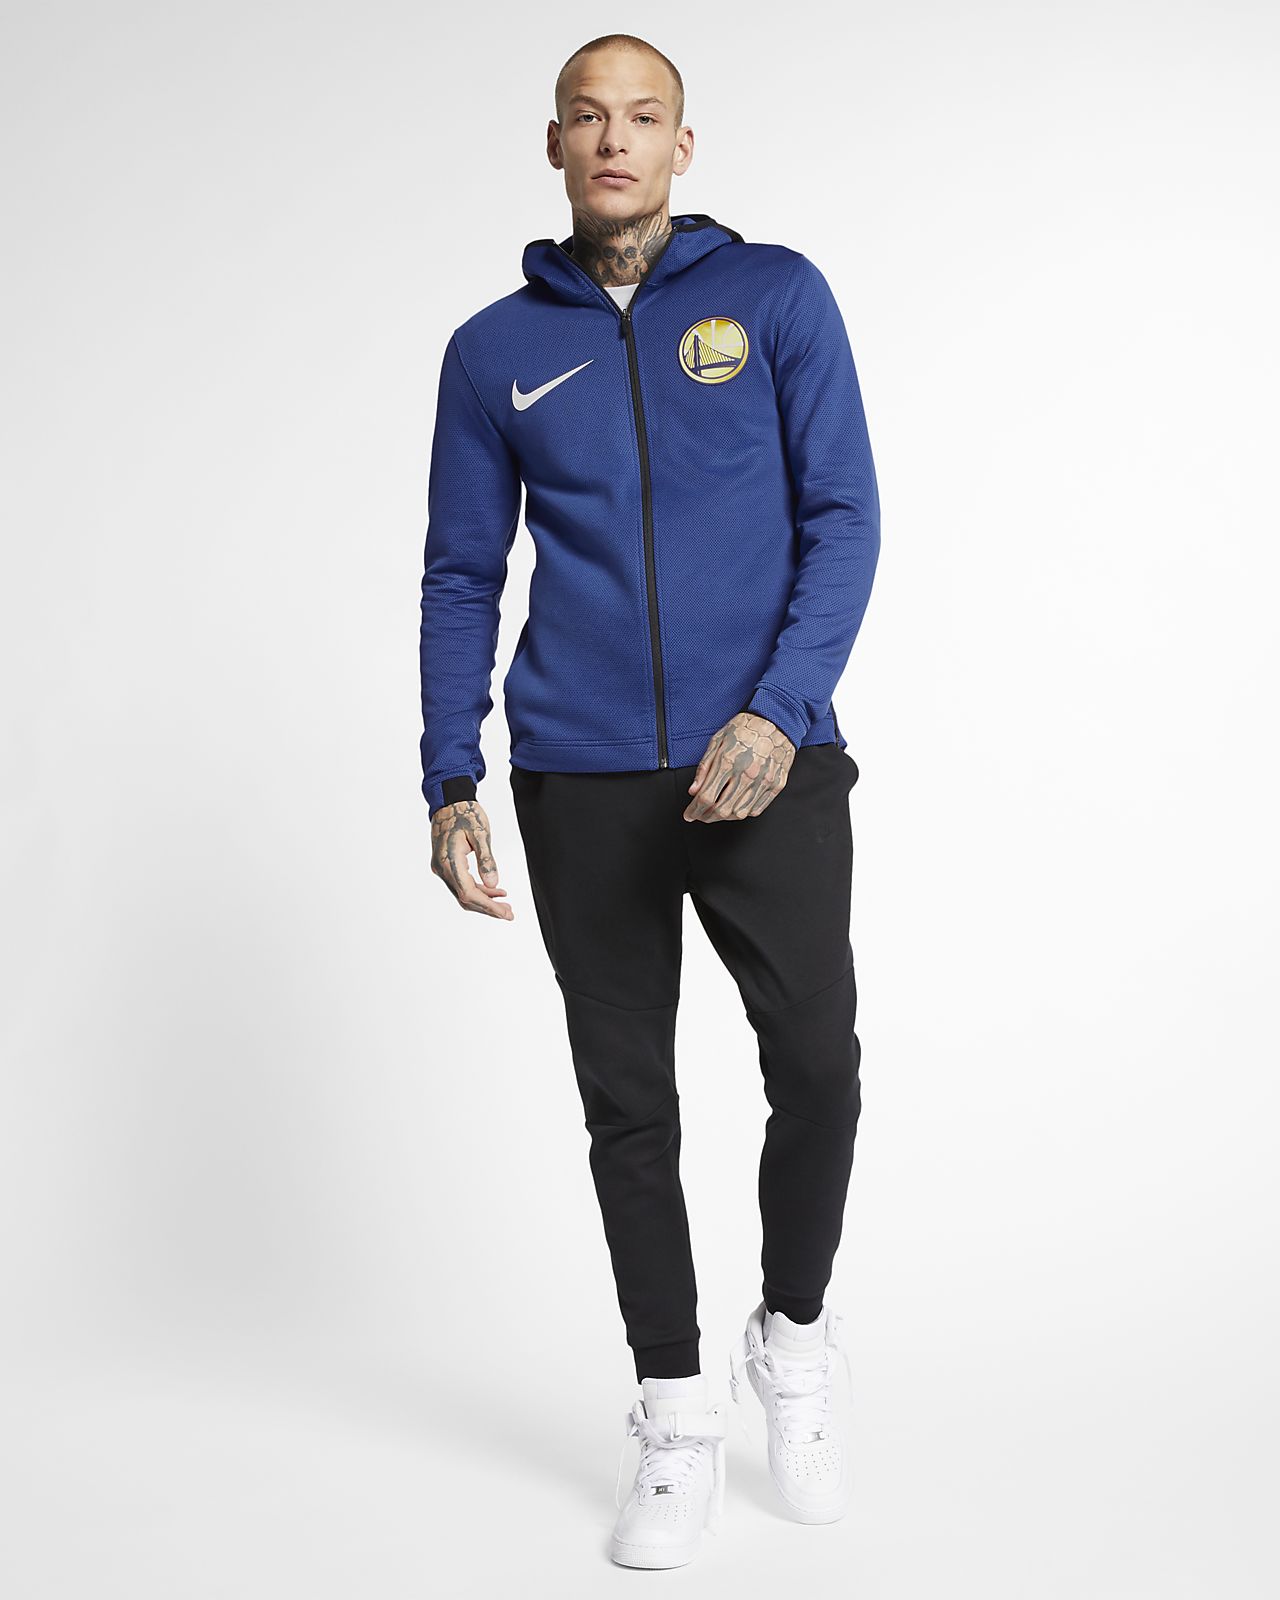 golden state warriors nike therma flex